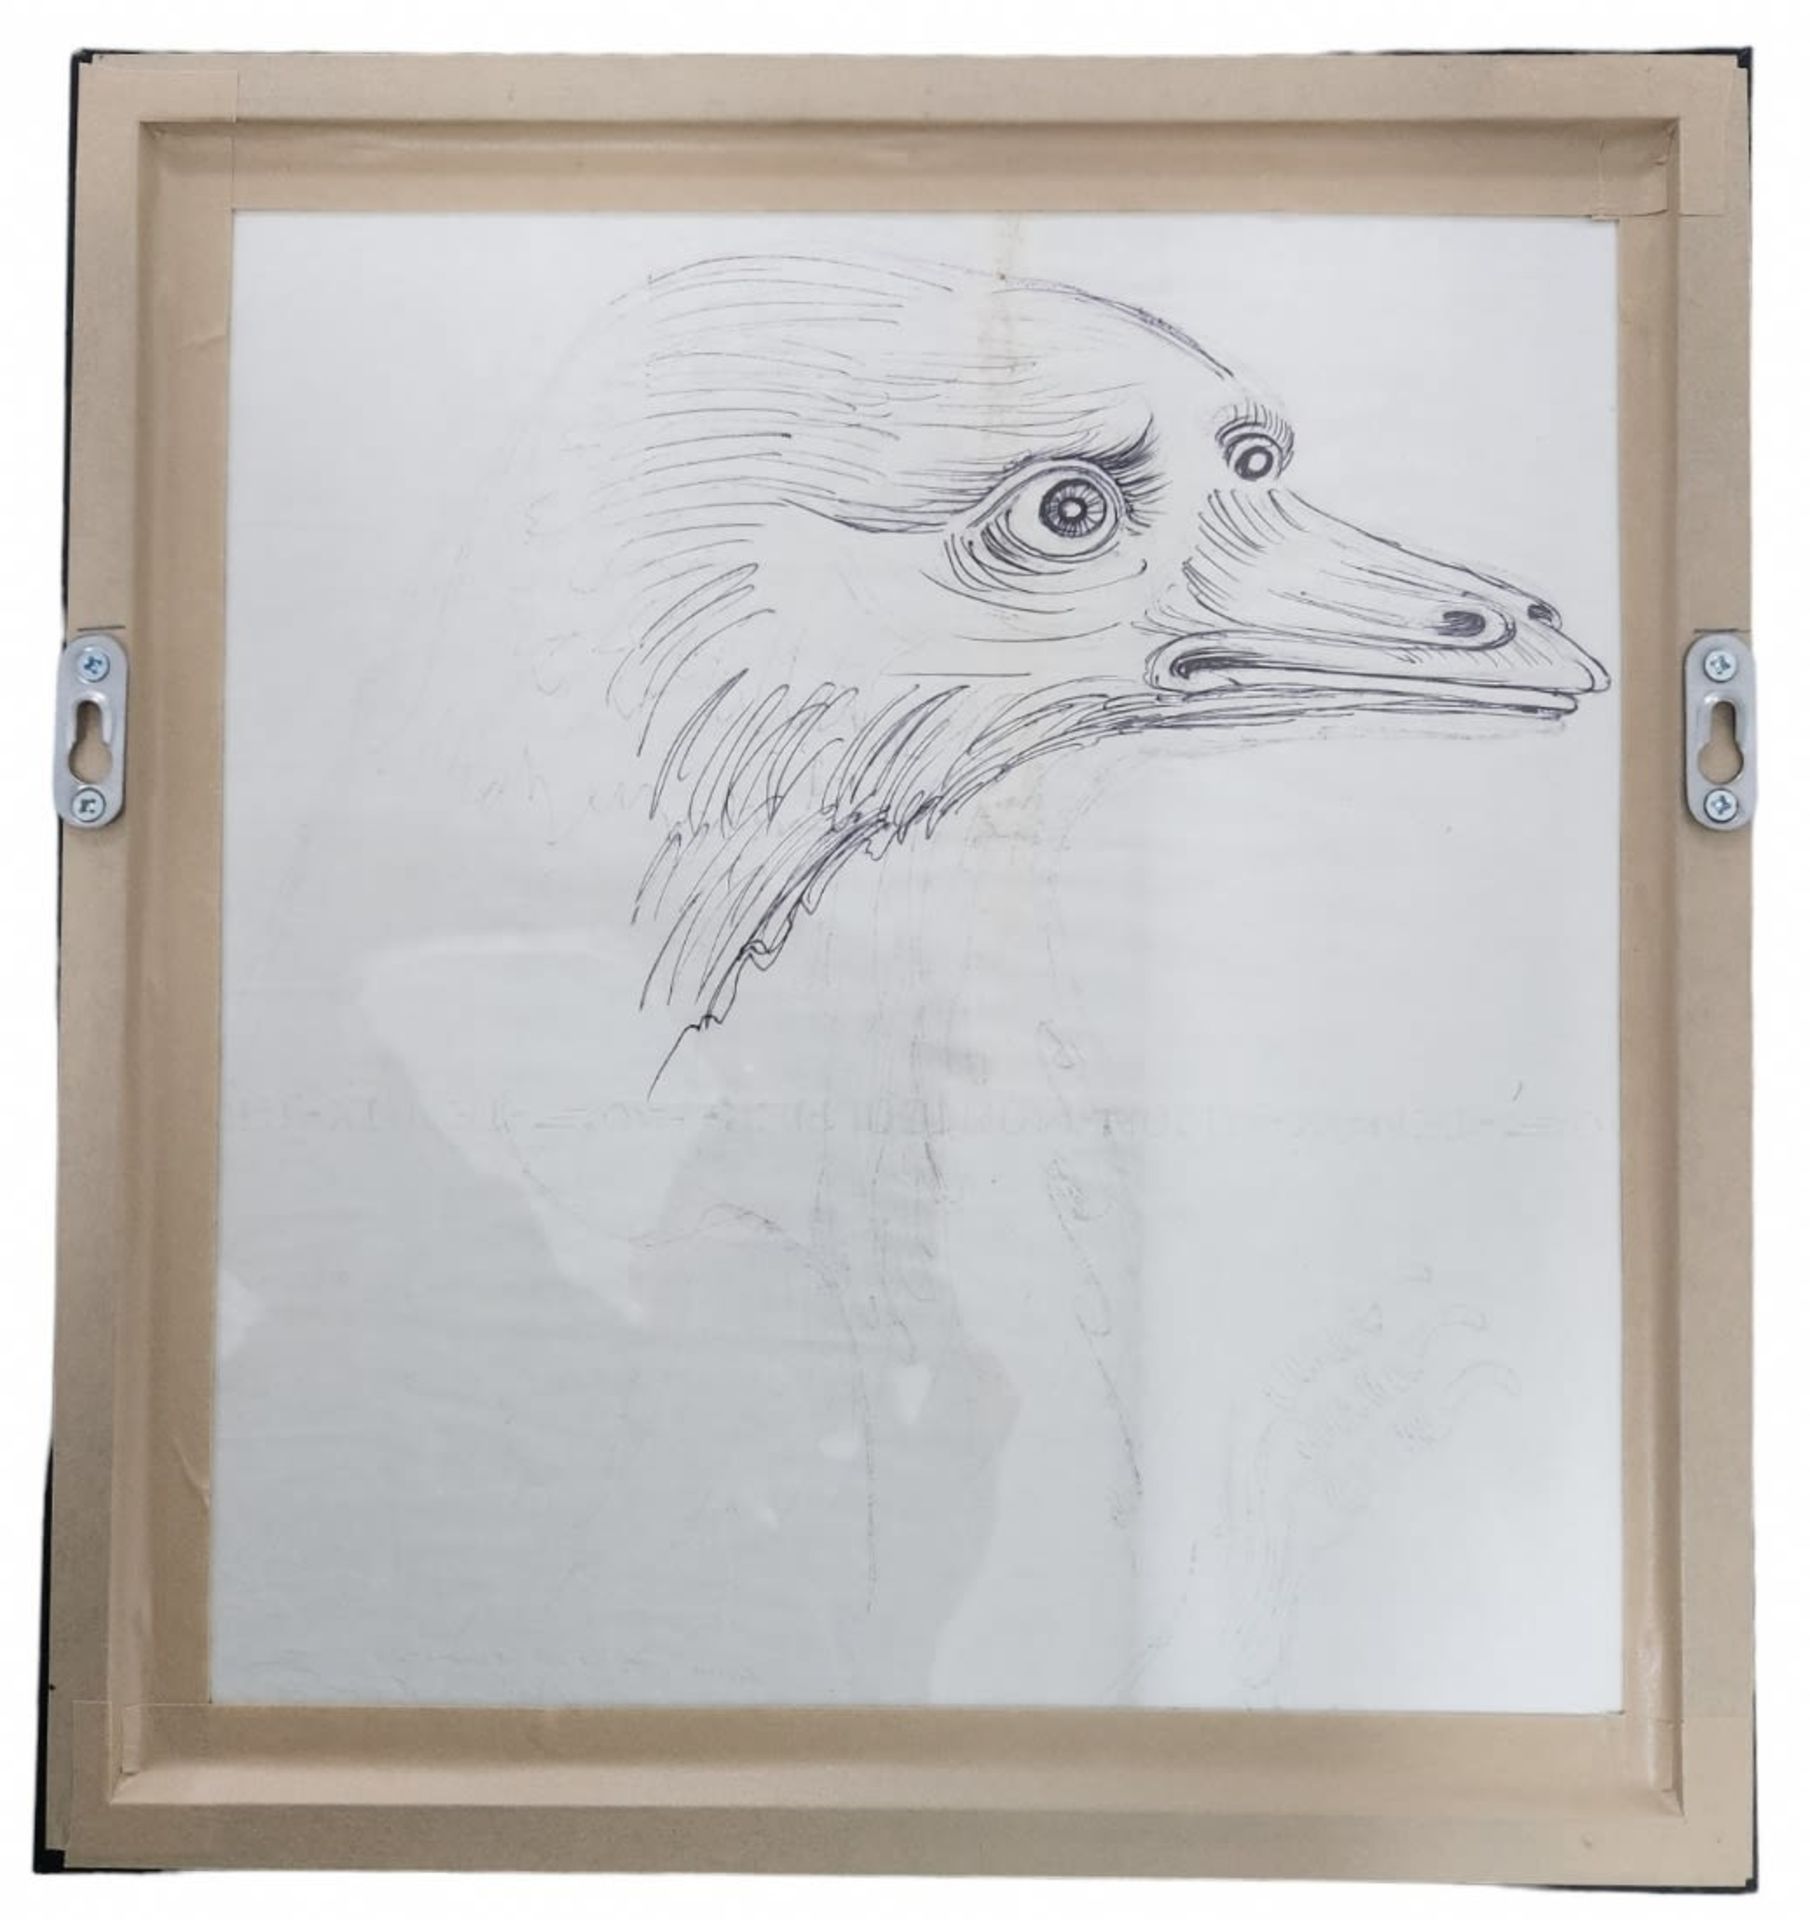 'Birds' - Jan Lebenstein , 1930-1999, drawing on paper, (two-sided drawing) signed and dated: - Image 4 of 4